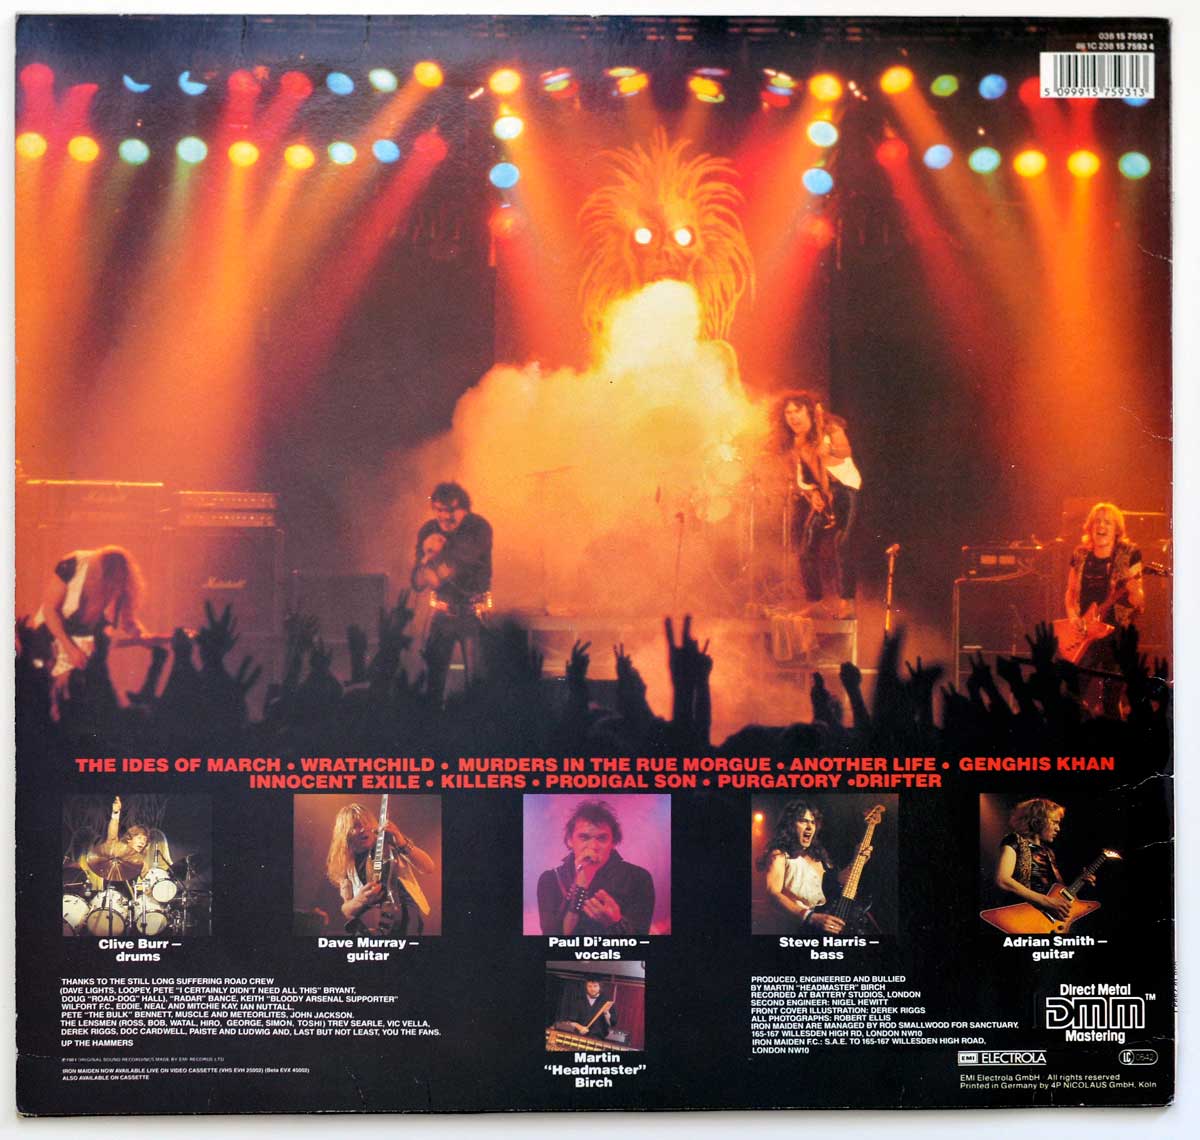 Photo of album back cover IRON MAIDEN - Killers Fame Germany 